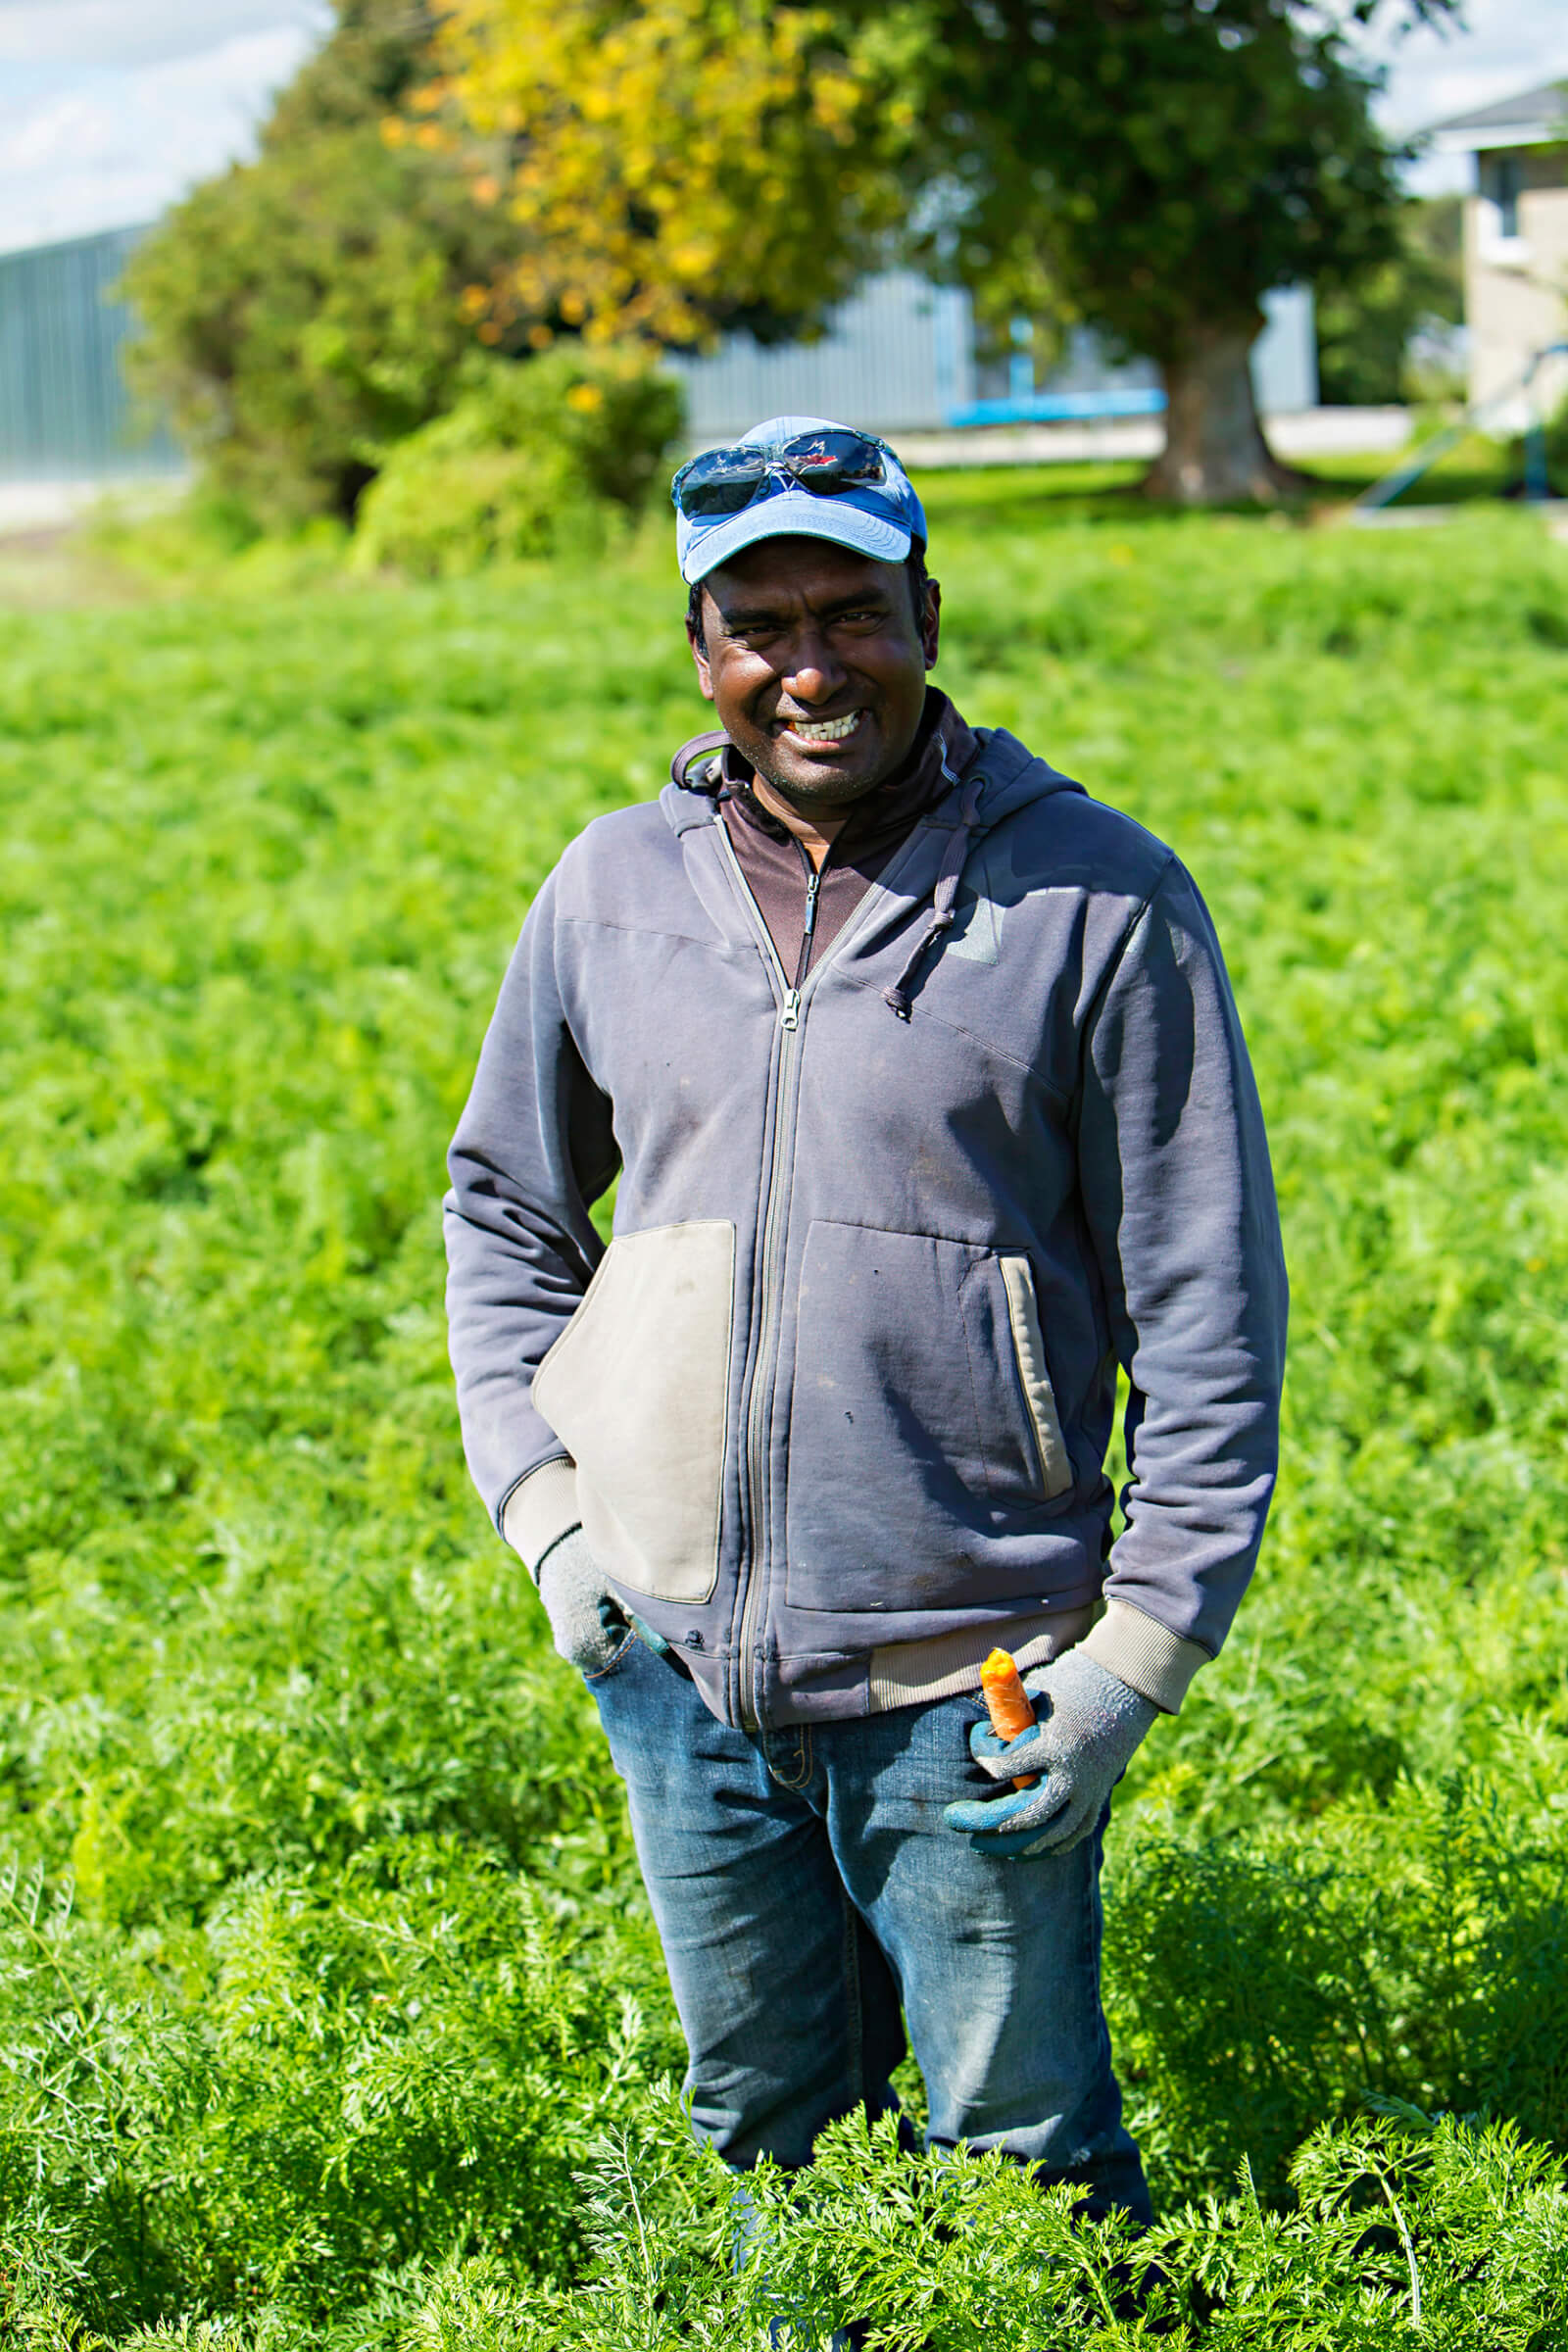 Ricardo, Seasonal Agricultural Worker from Trinidad and Tobago